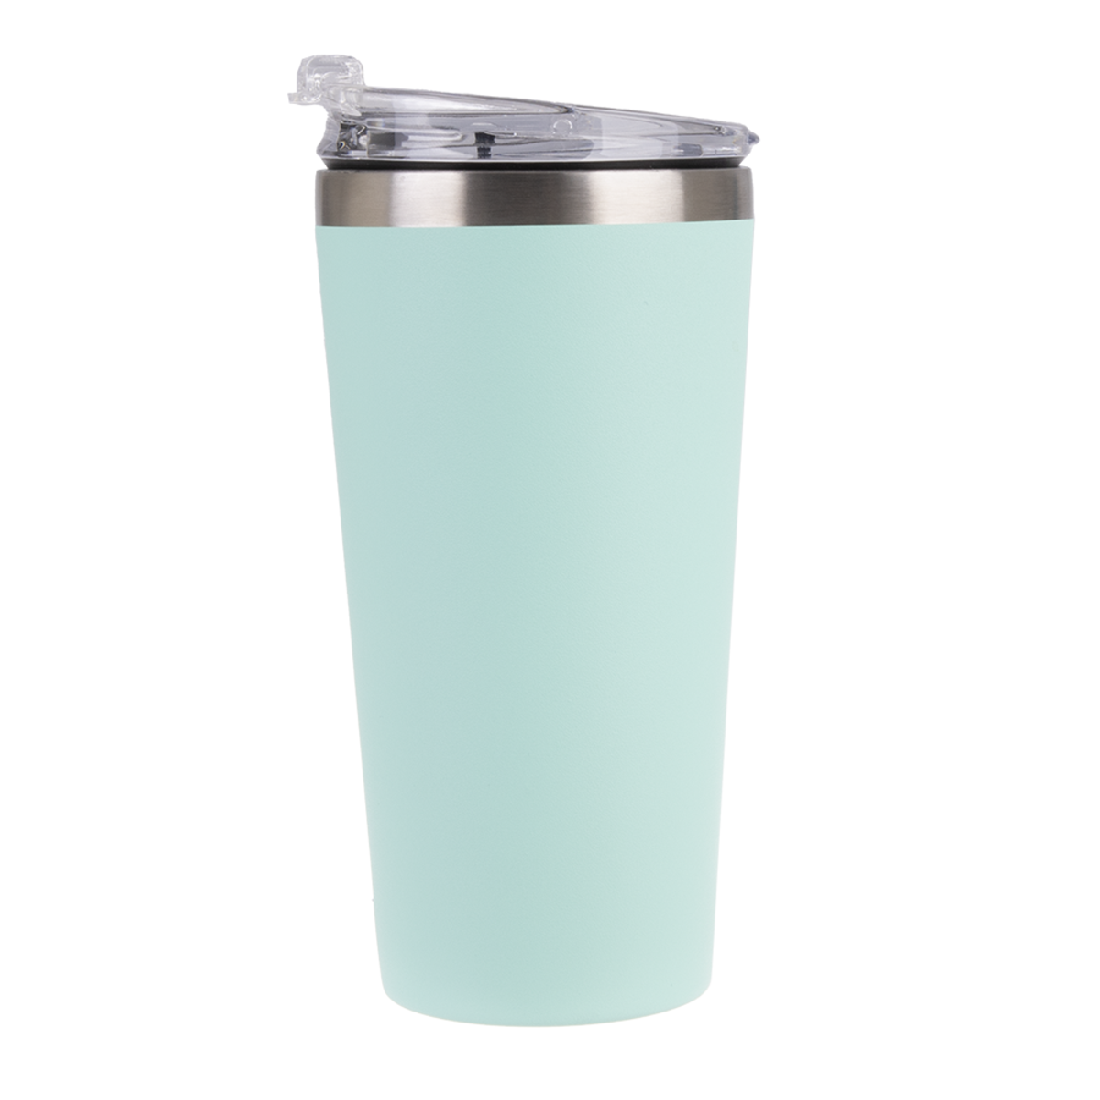 Oasis S/s Double Wall Insulated 'travel Mug' 480ml - Matte Mint